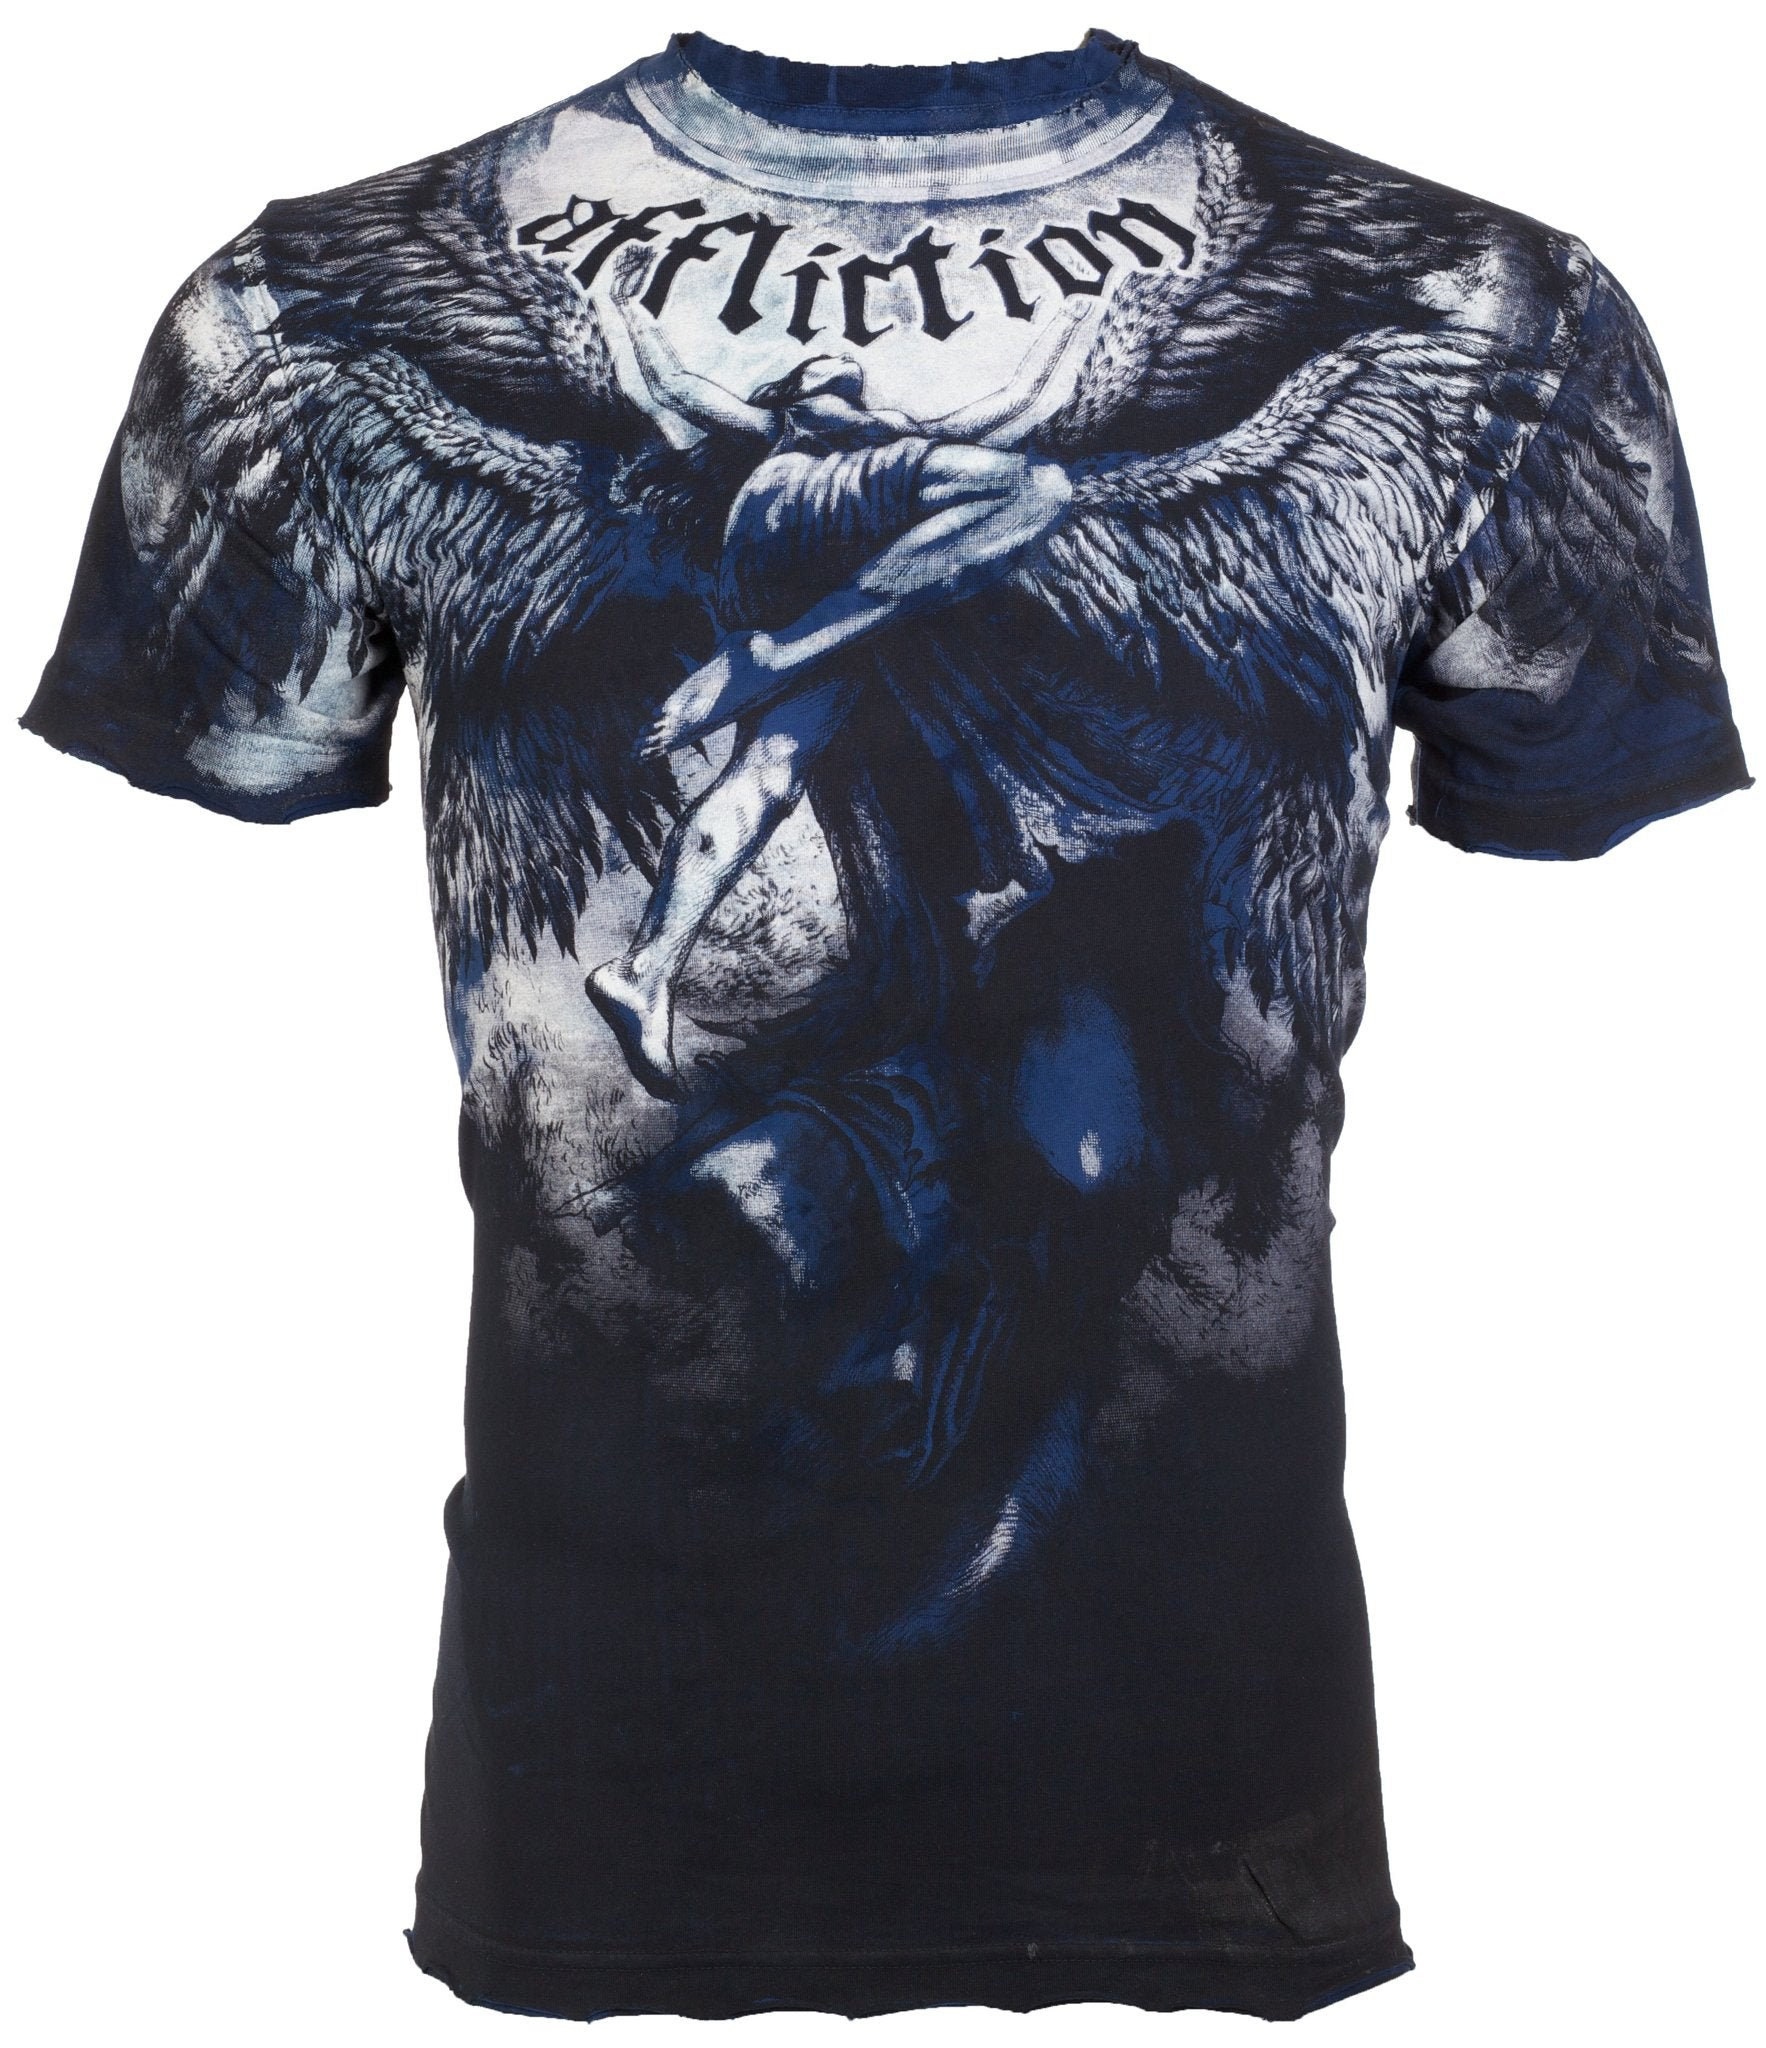 Unisex Afflicted To Uplifted Shirt - GoGlow Connection